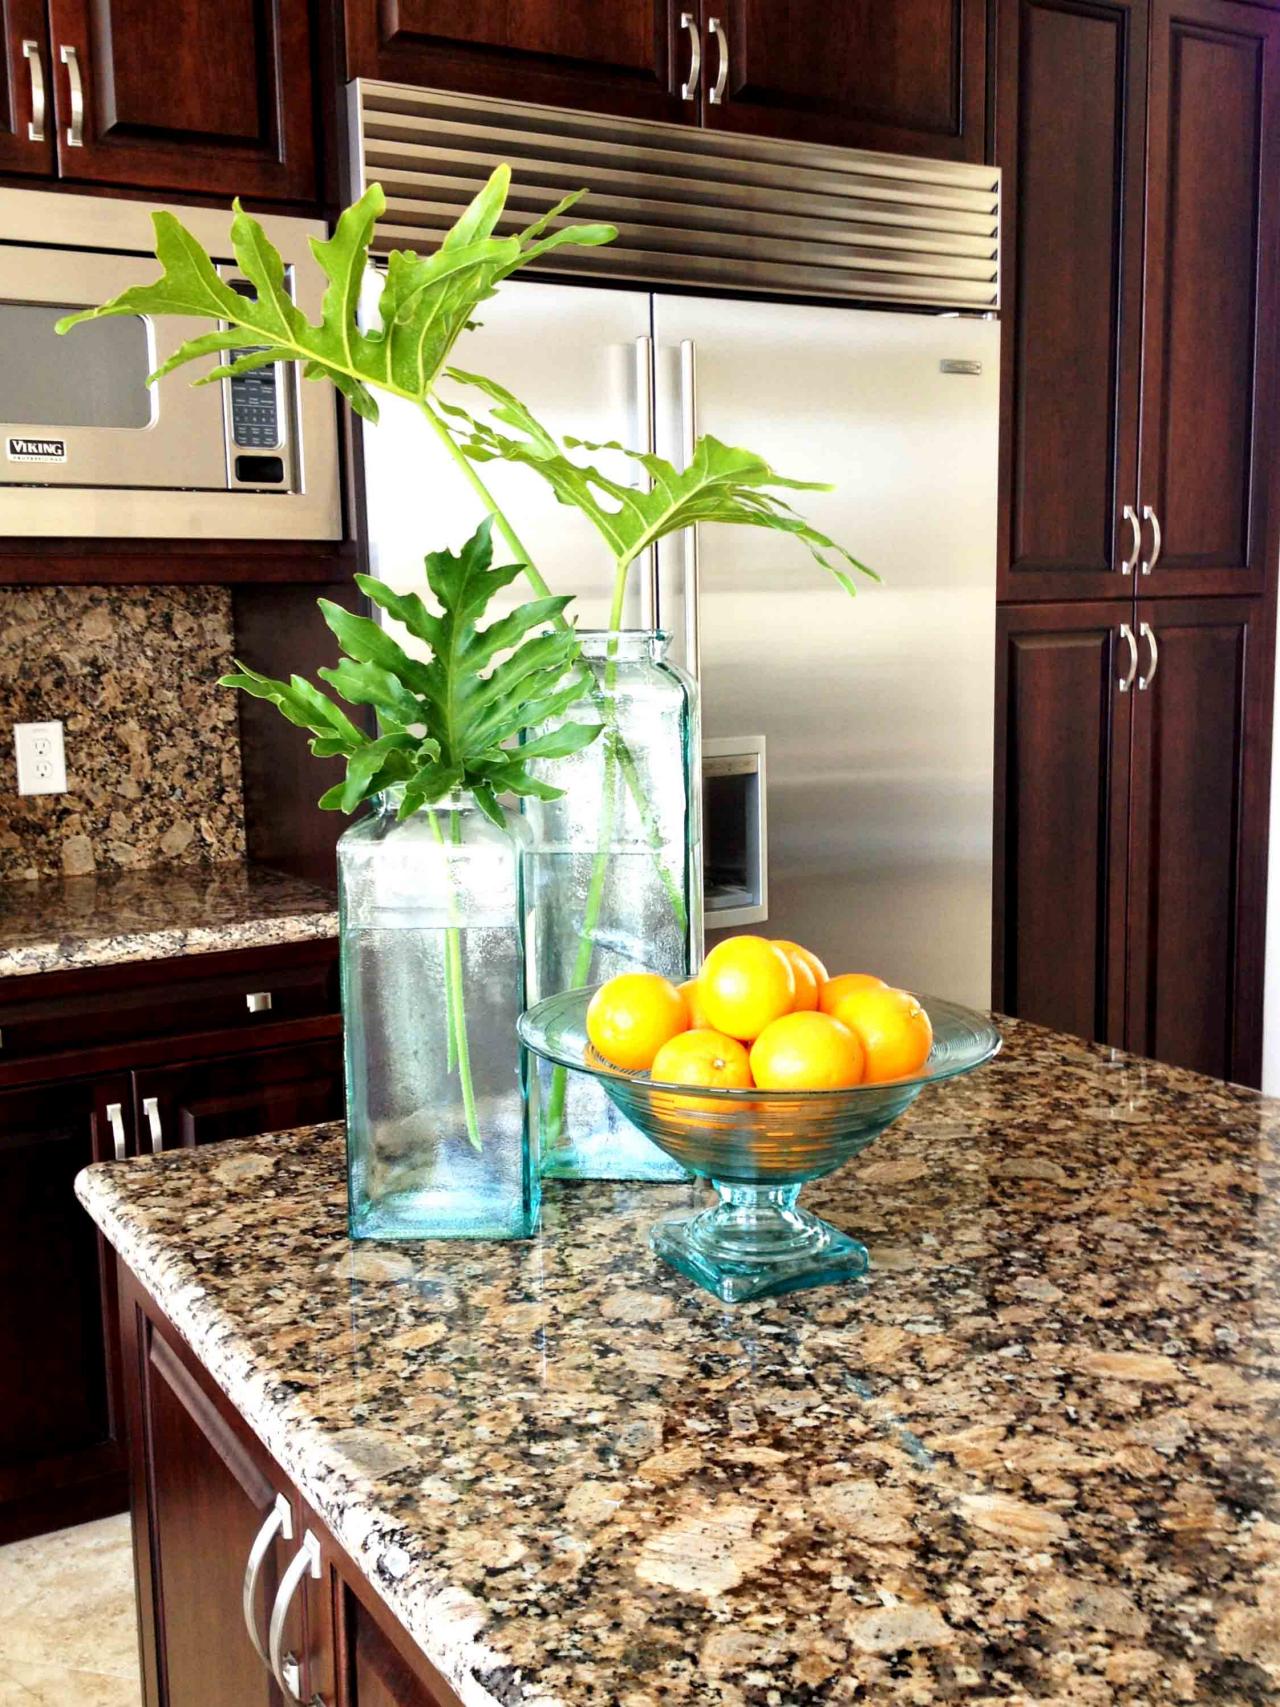 6 Best Countertop Materials for Kitchens